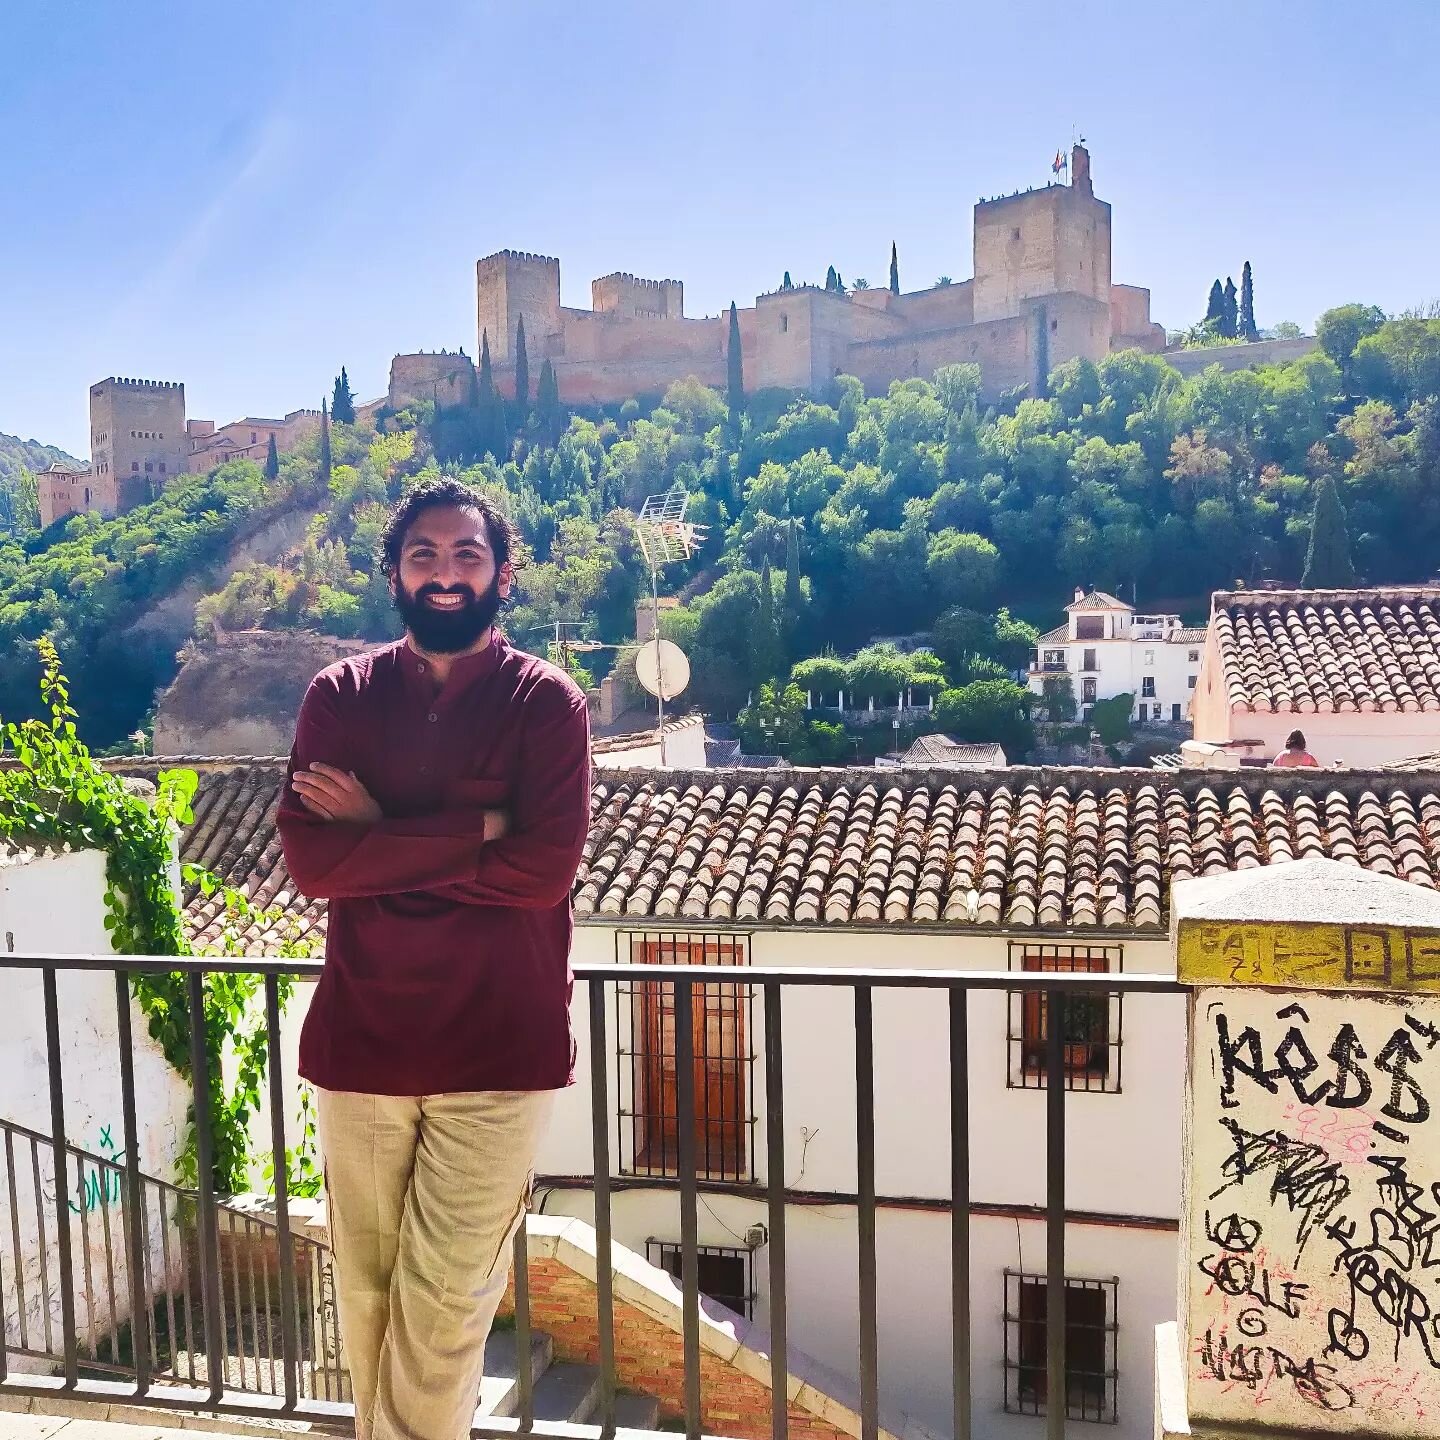 Alhamdullilah I had the ability to tour Al Andulus (Andulusia) visiting historical and mesmerising places in Seville, Cordoba and Granada. Can't wait to share the inspirations, stories, photography and more with you all insha'Allah. 

#alhambra #gran